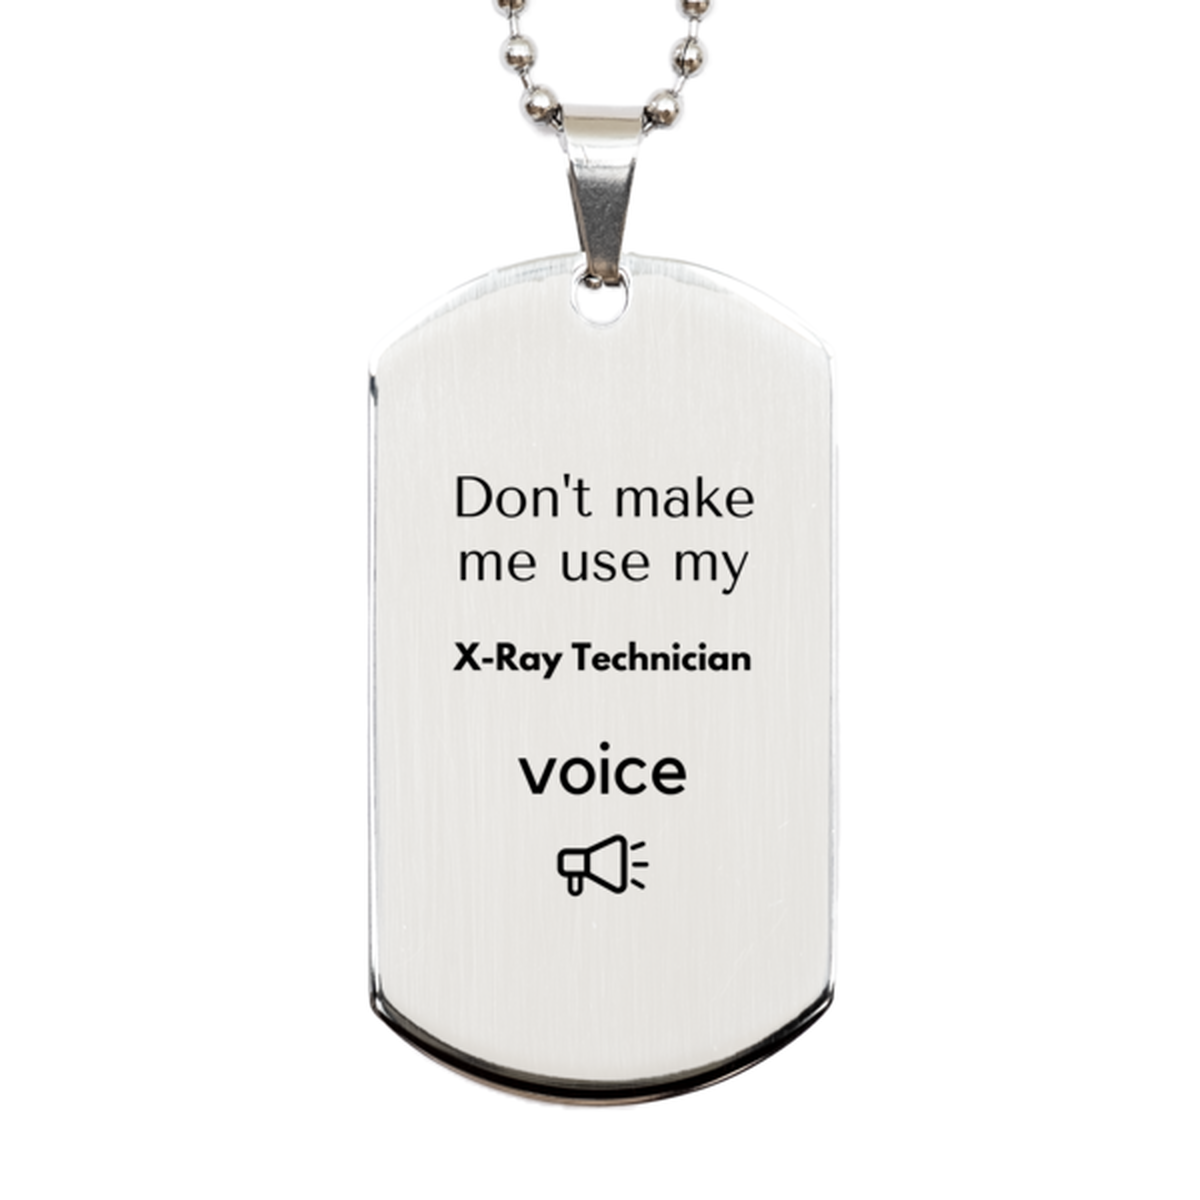 Don't make me use my X-Ray Technician voice, Sarcasm X-Ray Technician Gifts, Christmas X-Ray Technician Silver Dog Tag Birthday Unique Gifts For X-Ray Technician Coworkers, Men, Women, Colleague, Friends